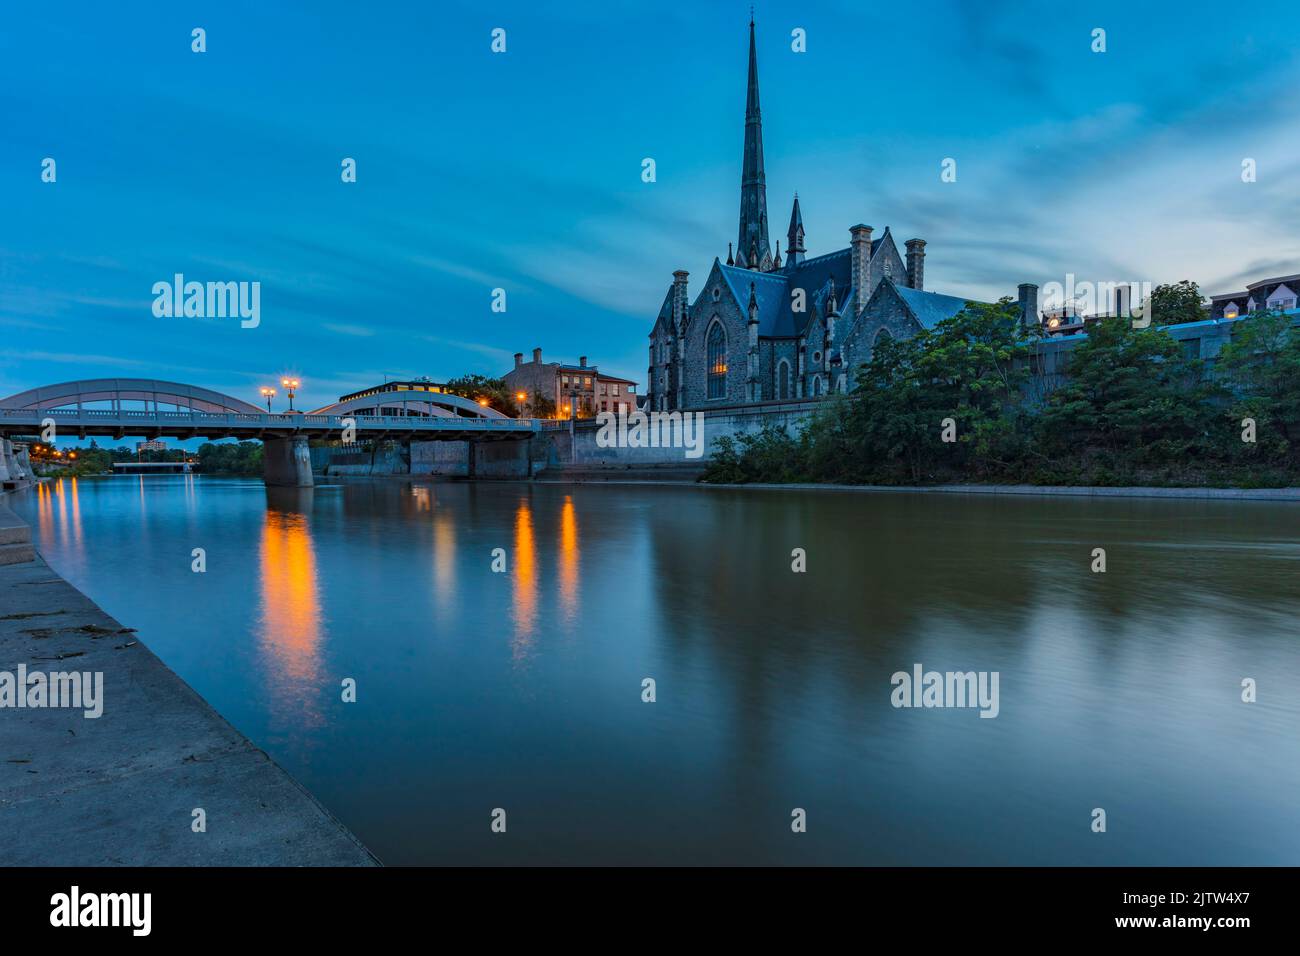 What photographers call Blue Hour casts a serene hue over the Grand River at Cambridge, Ontario, Canada, as the sun goes down. Stock Photo